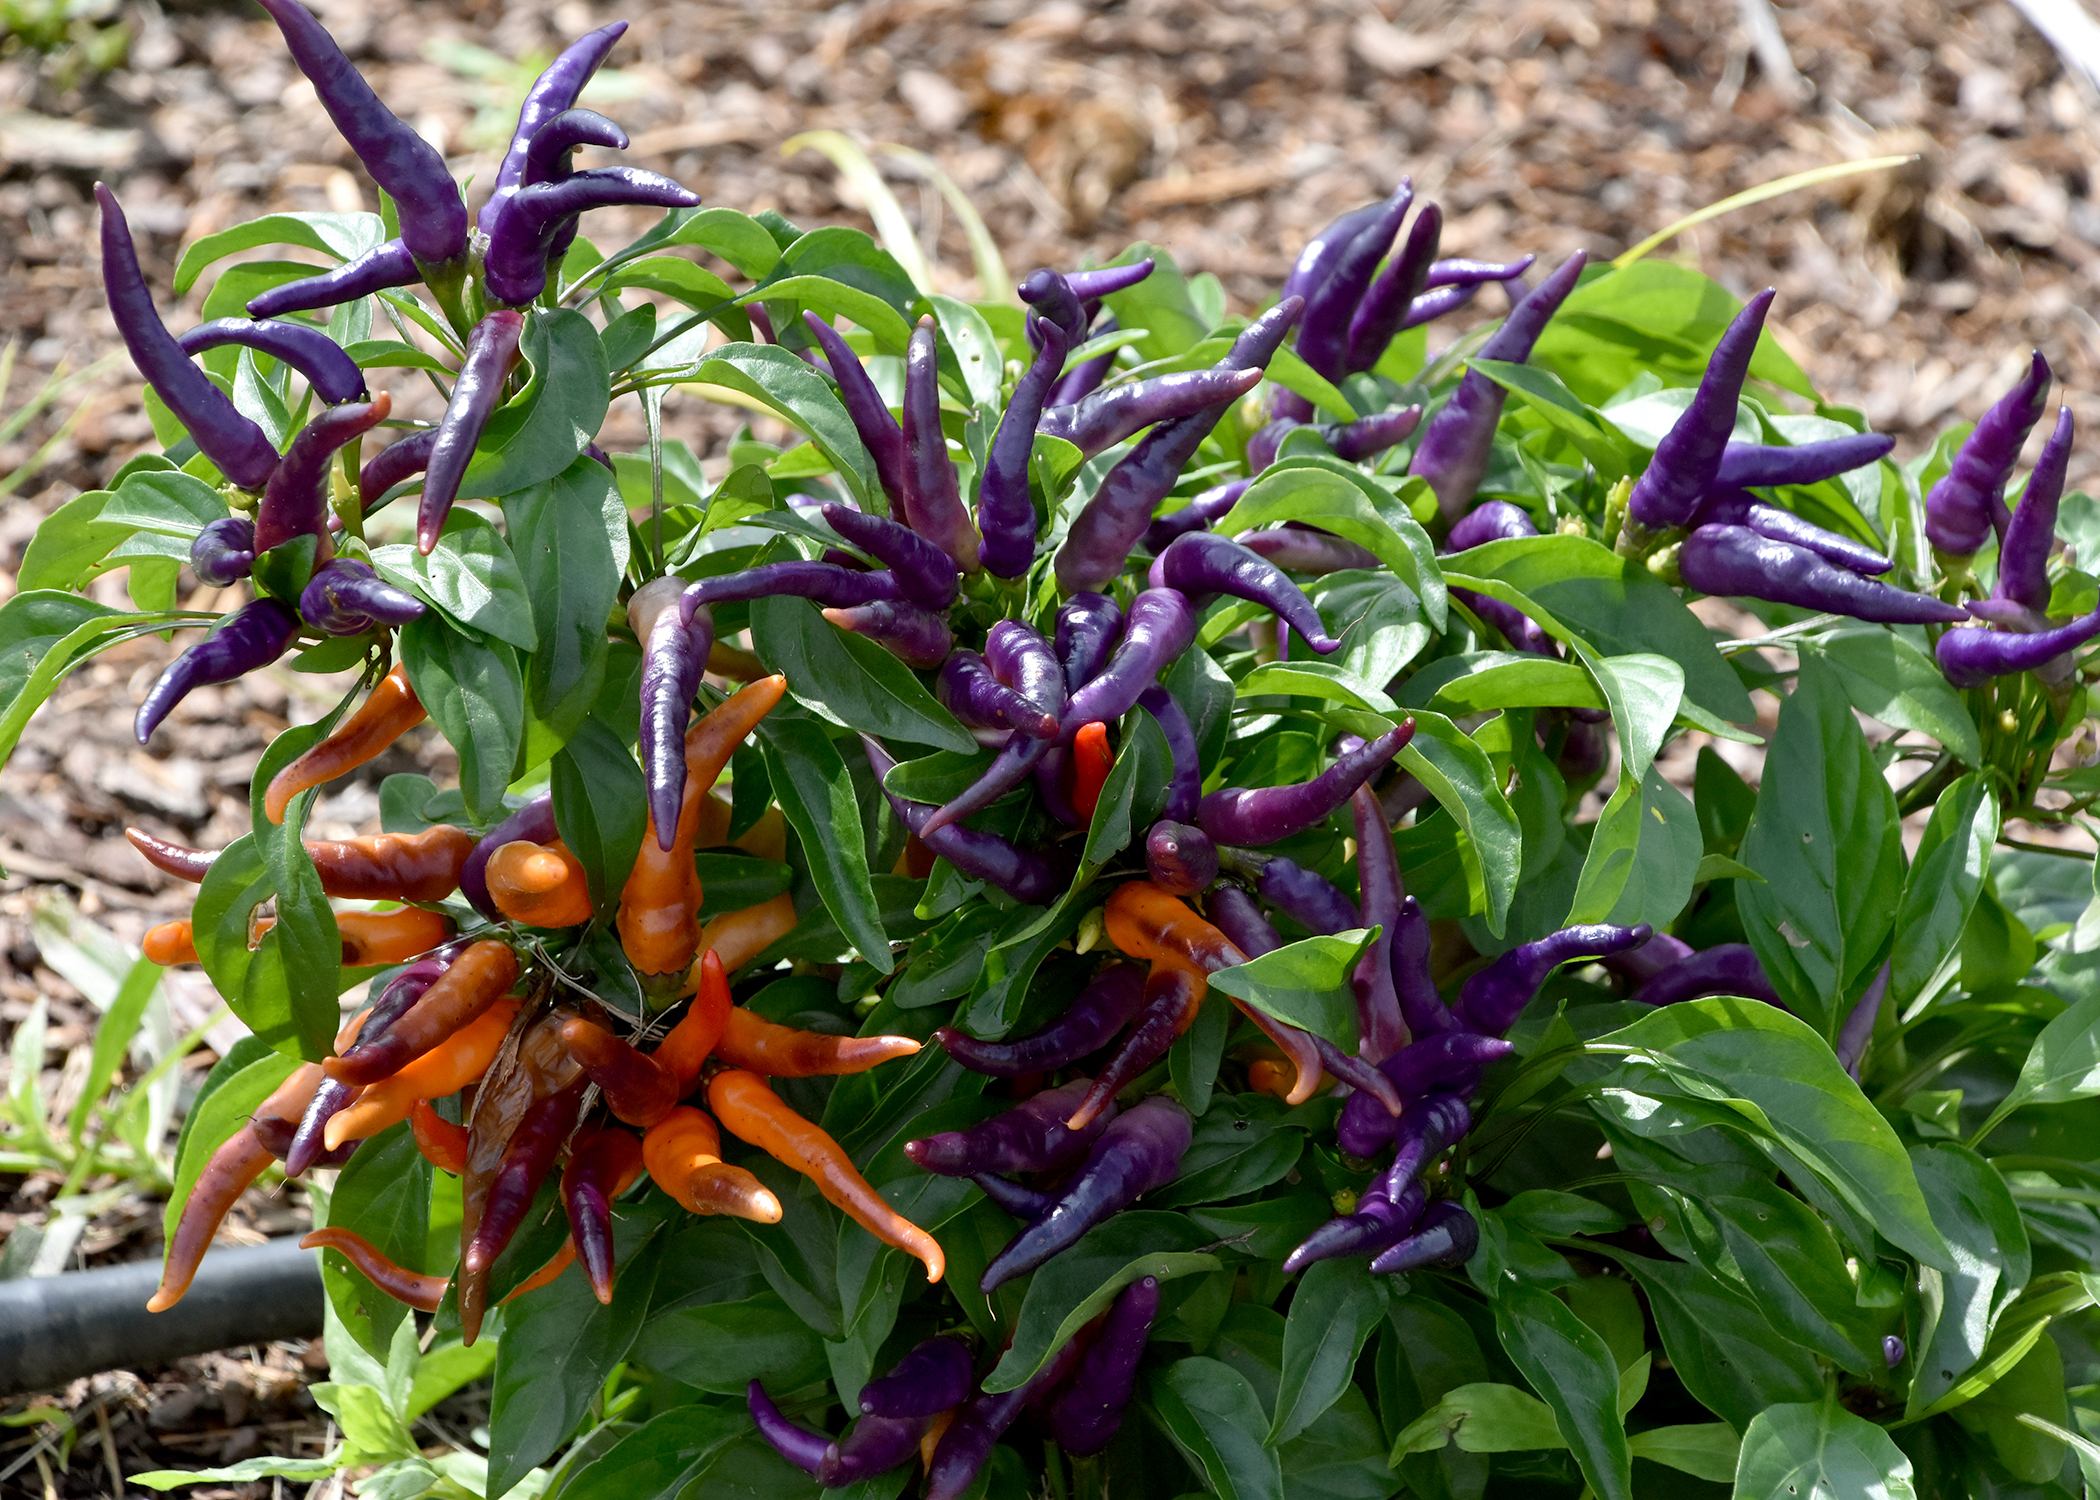 These warm-season NuMex April Fool’s Day ornamental peppers are beautiful as well as edible. (Photo by MSU Extension/Gary Bachman)